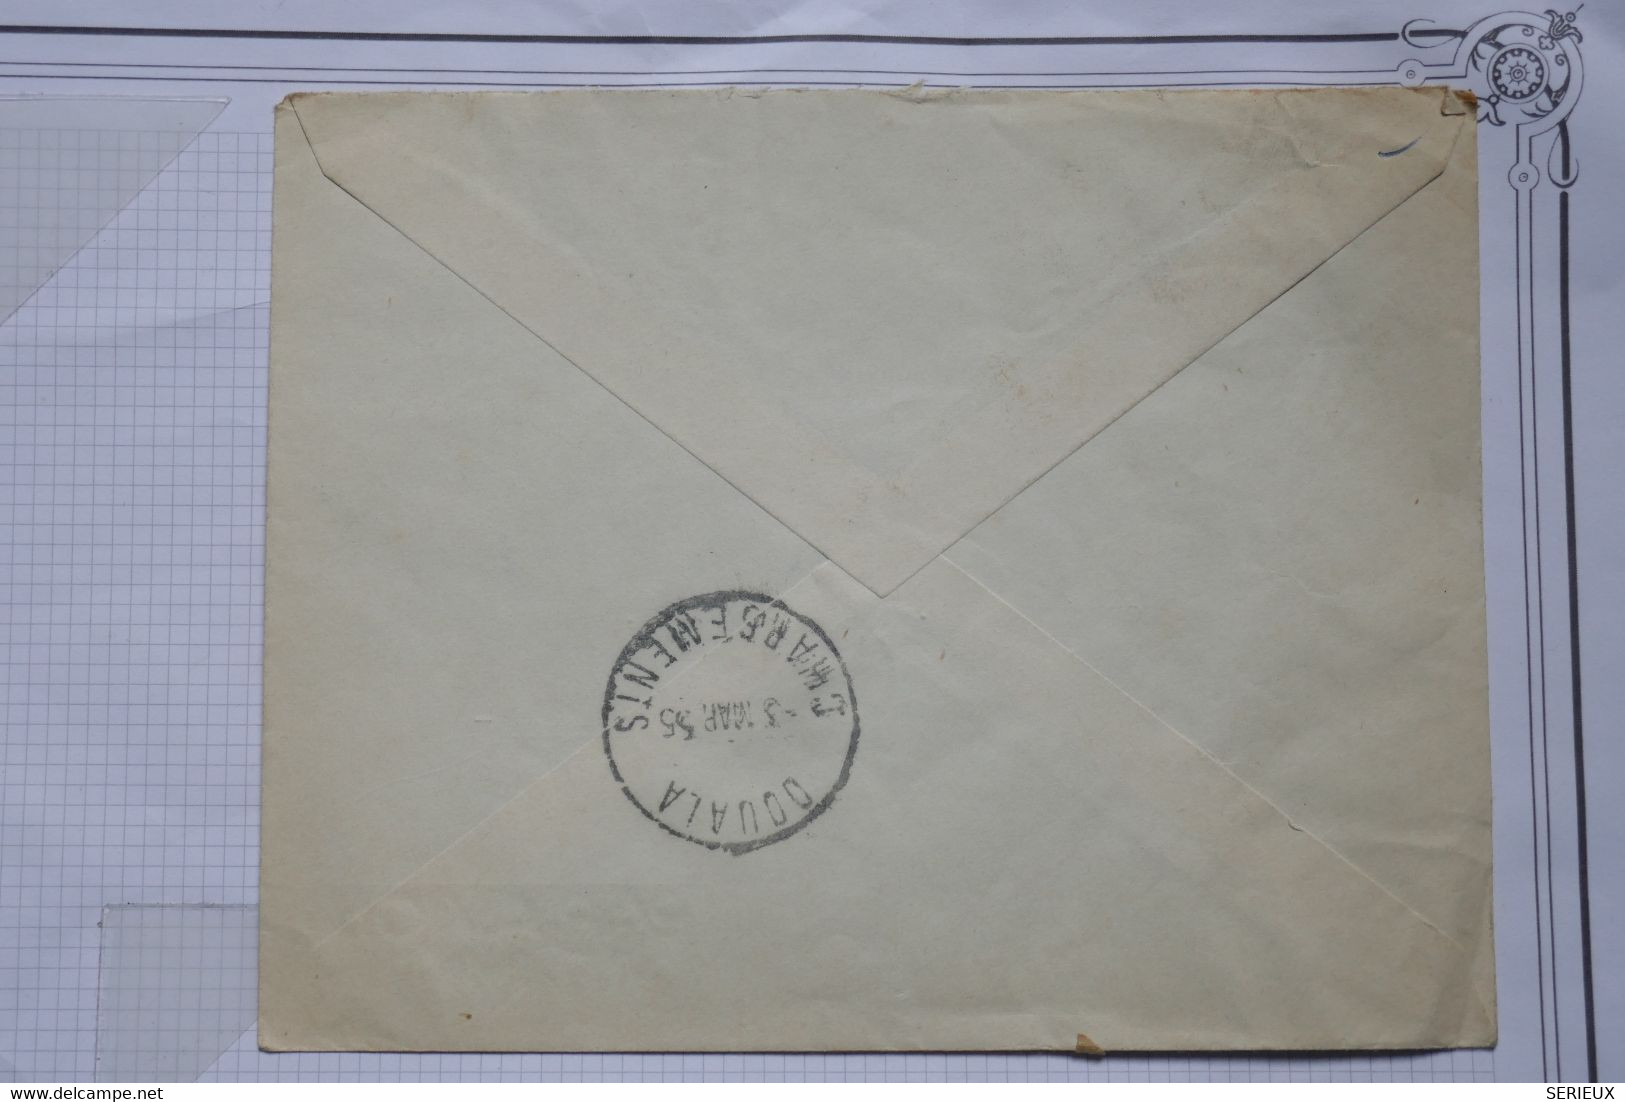 BE14  CAMEROUN   LETTRE RECOM.  1955 DOUALA  A  MARSEILLE  FRANCE ++ +AFFRANCH. PLAISANT - Covers & Documents